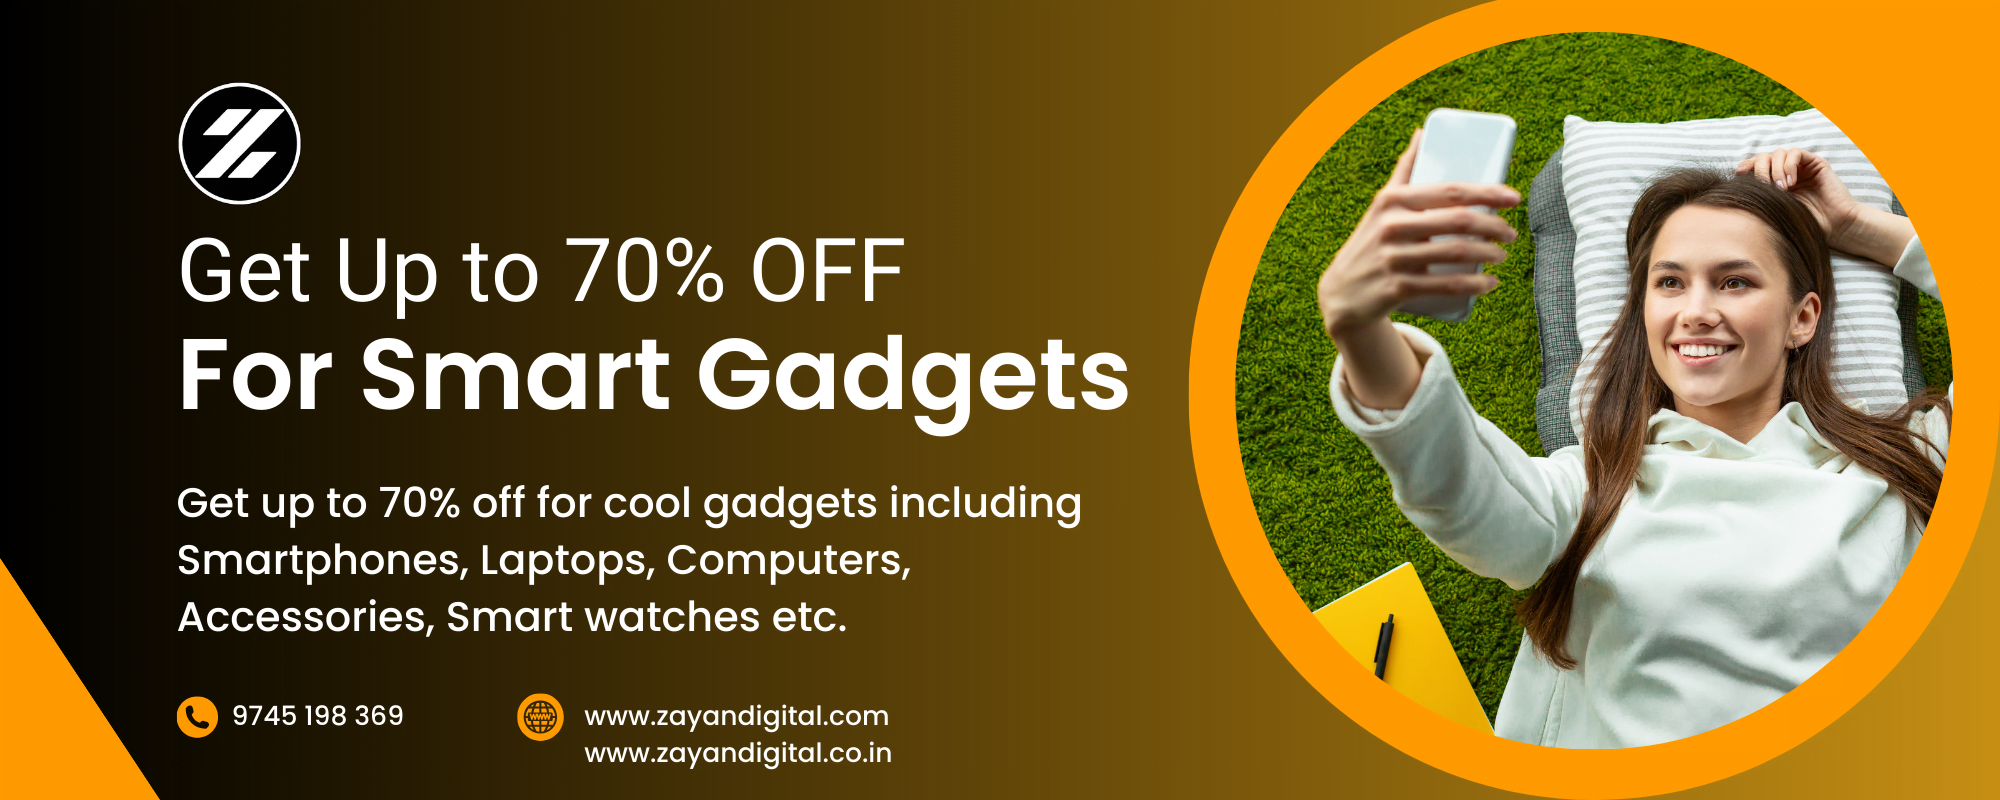 Get up to 70% off for smart phones, accessories and cool gadgets